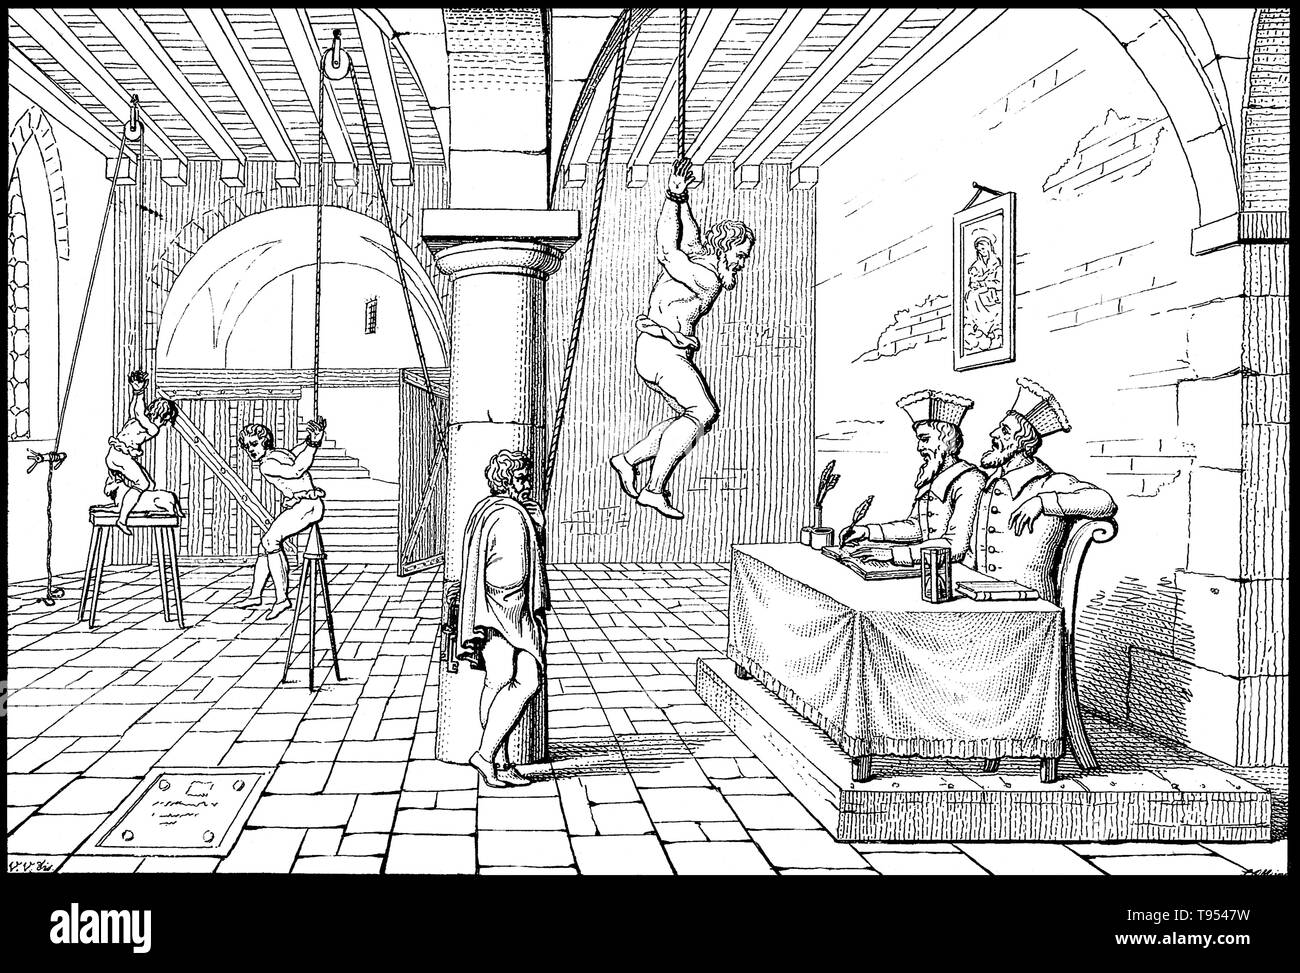 An Inquisition torture chamber where one victim is tied up and suspended from a pulley while being interrogated by two scribes, while another victim is suspended from the ceiling and lowered onto a spike with his rectum. The Inquisition was a group of institutions within the government system of the Catholic Church whose aim was to combat heresy. It started in 12th century France to combat religious sectarianism, in particular the Cathars and the Waldensians. Stock Photo